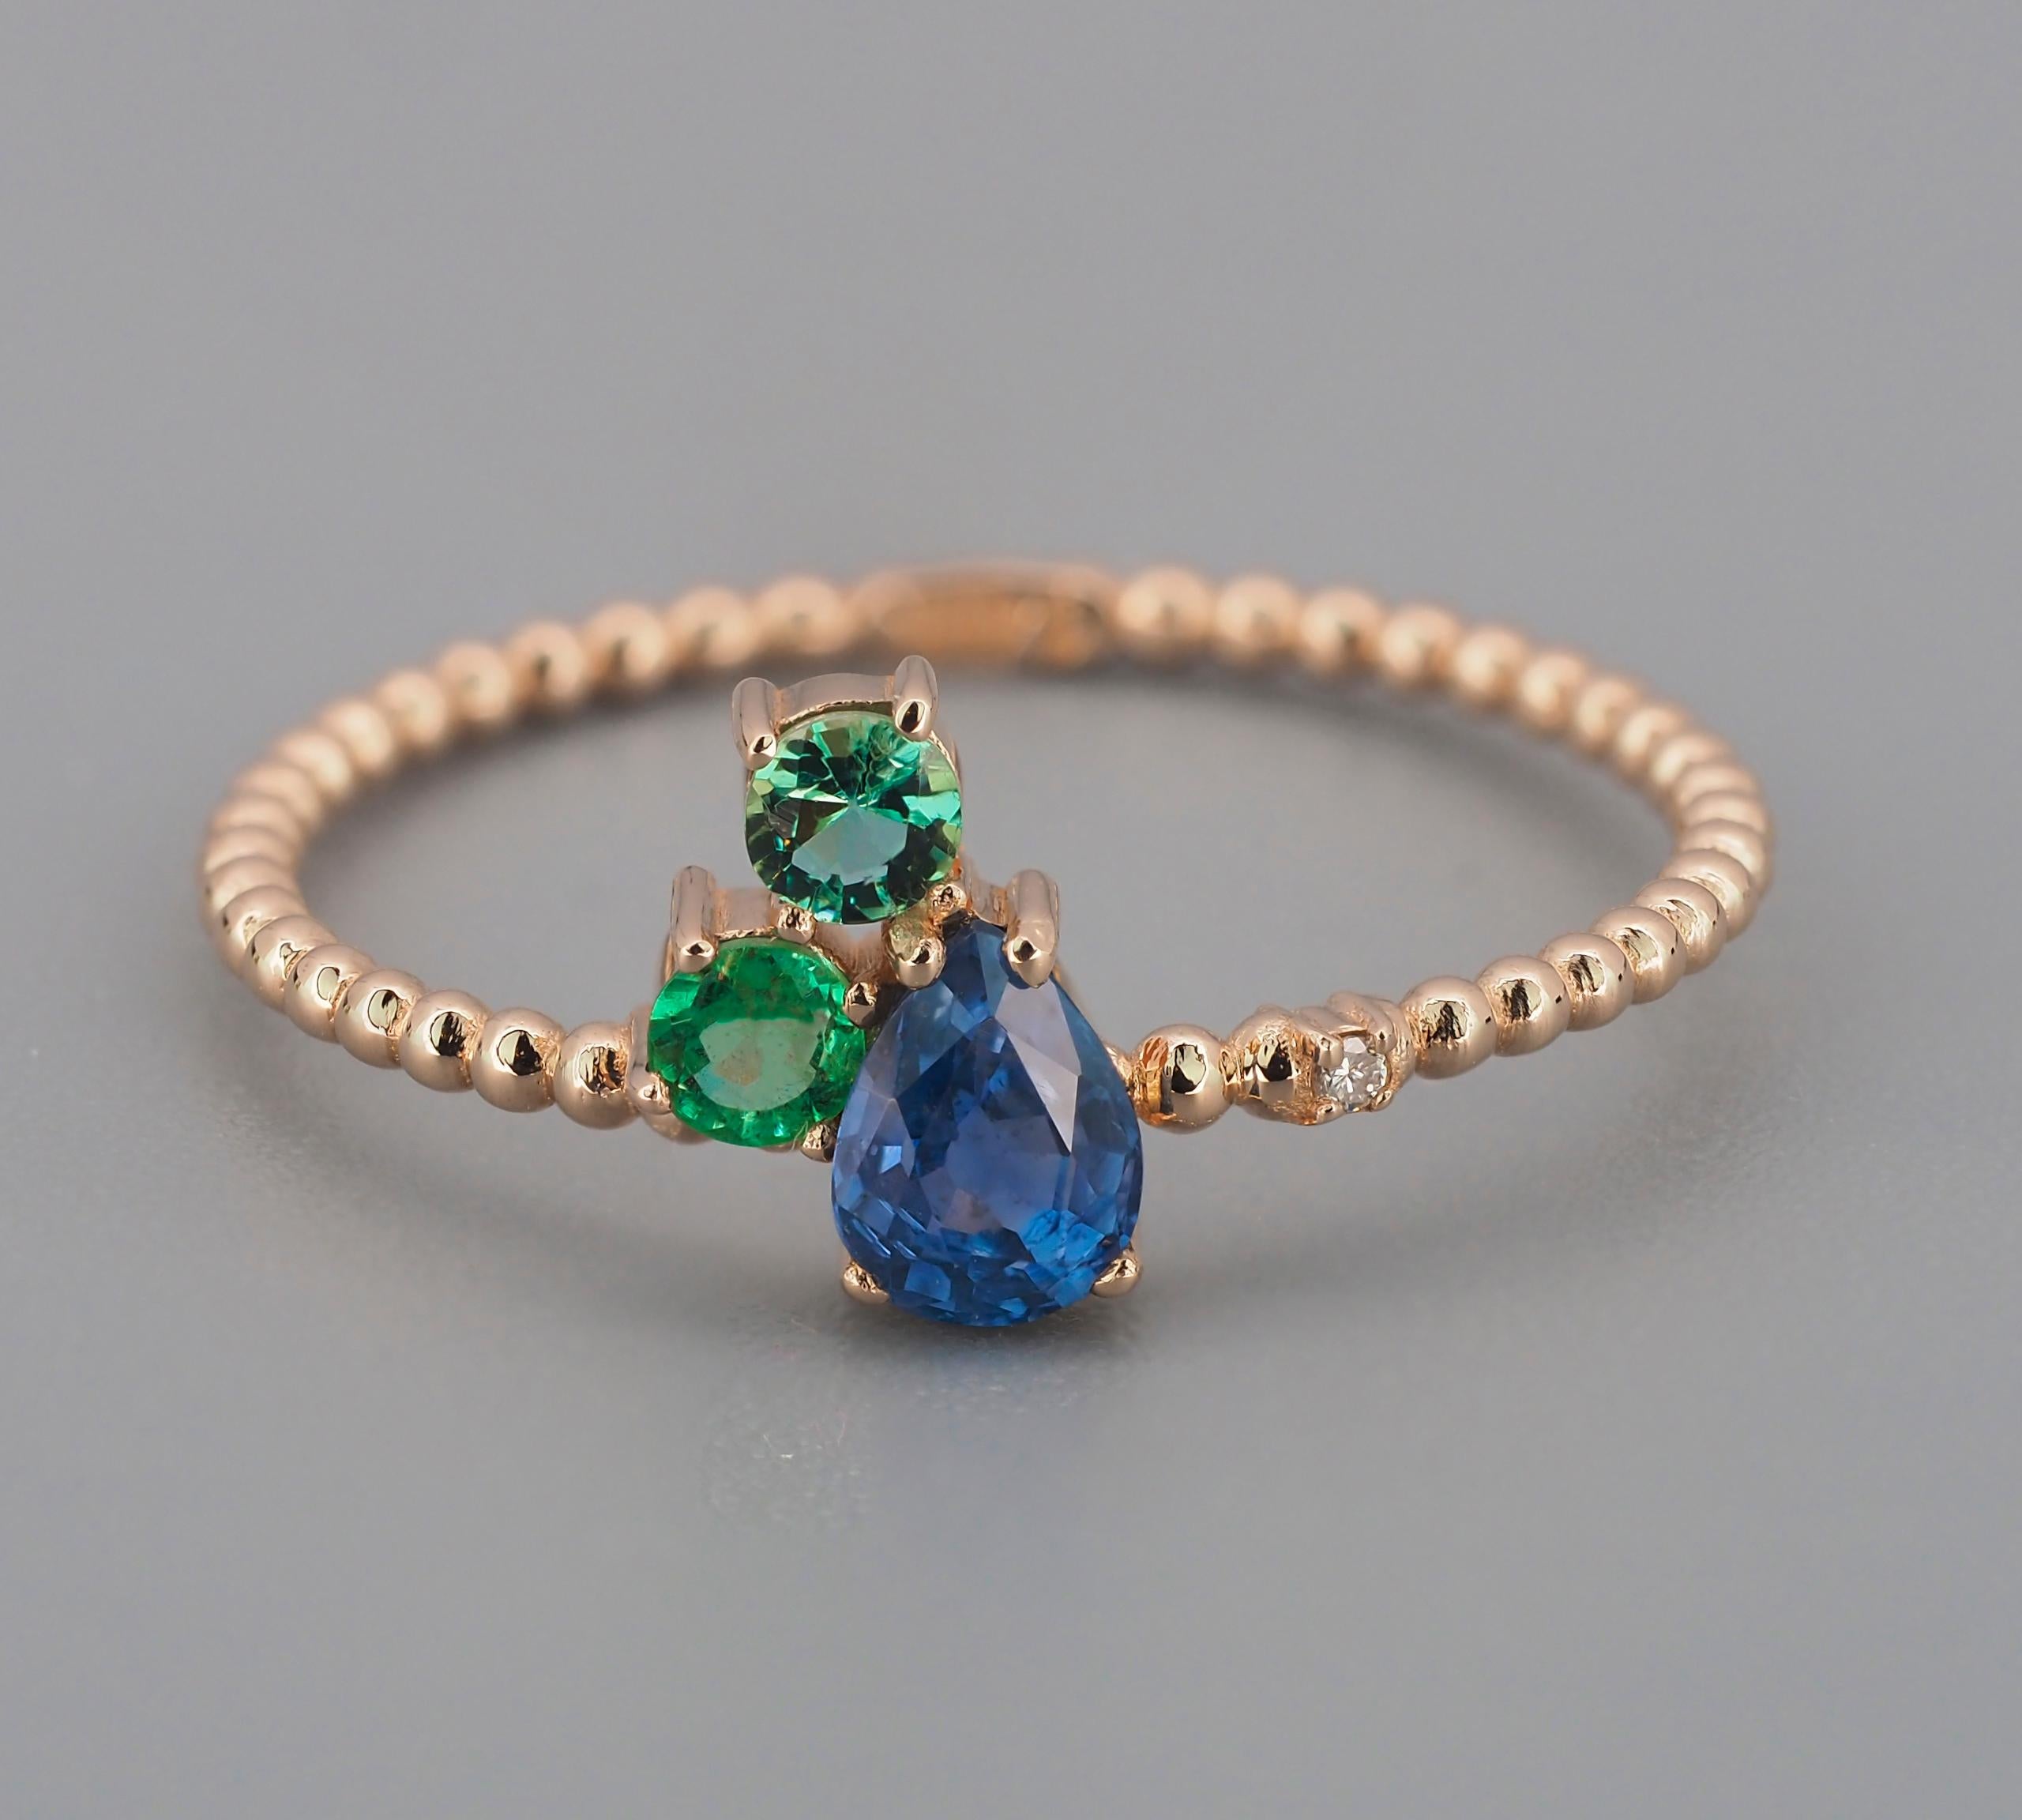 14 kt solid gold ring with natural sapphire, emeralds and diamond. September birthstone.

Weight: 1.3 g.

Gemstone: 
Natural  sapphire:
Weight - approx 0.50 ct, cut - pear
Color - blue, clarity - transparent with inclusions (See in photo)
Natural